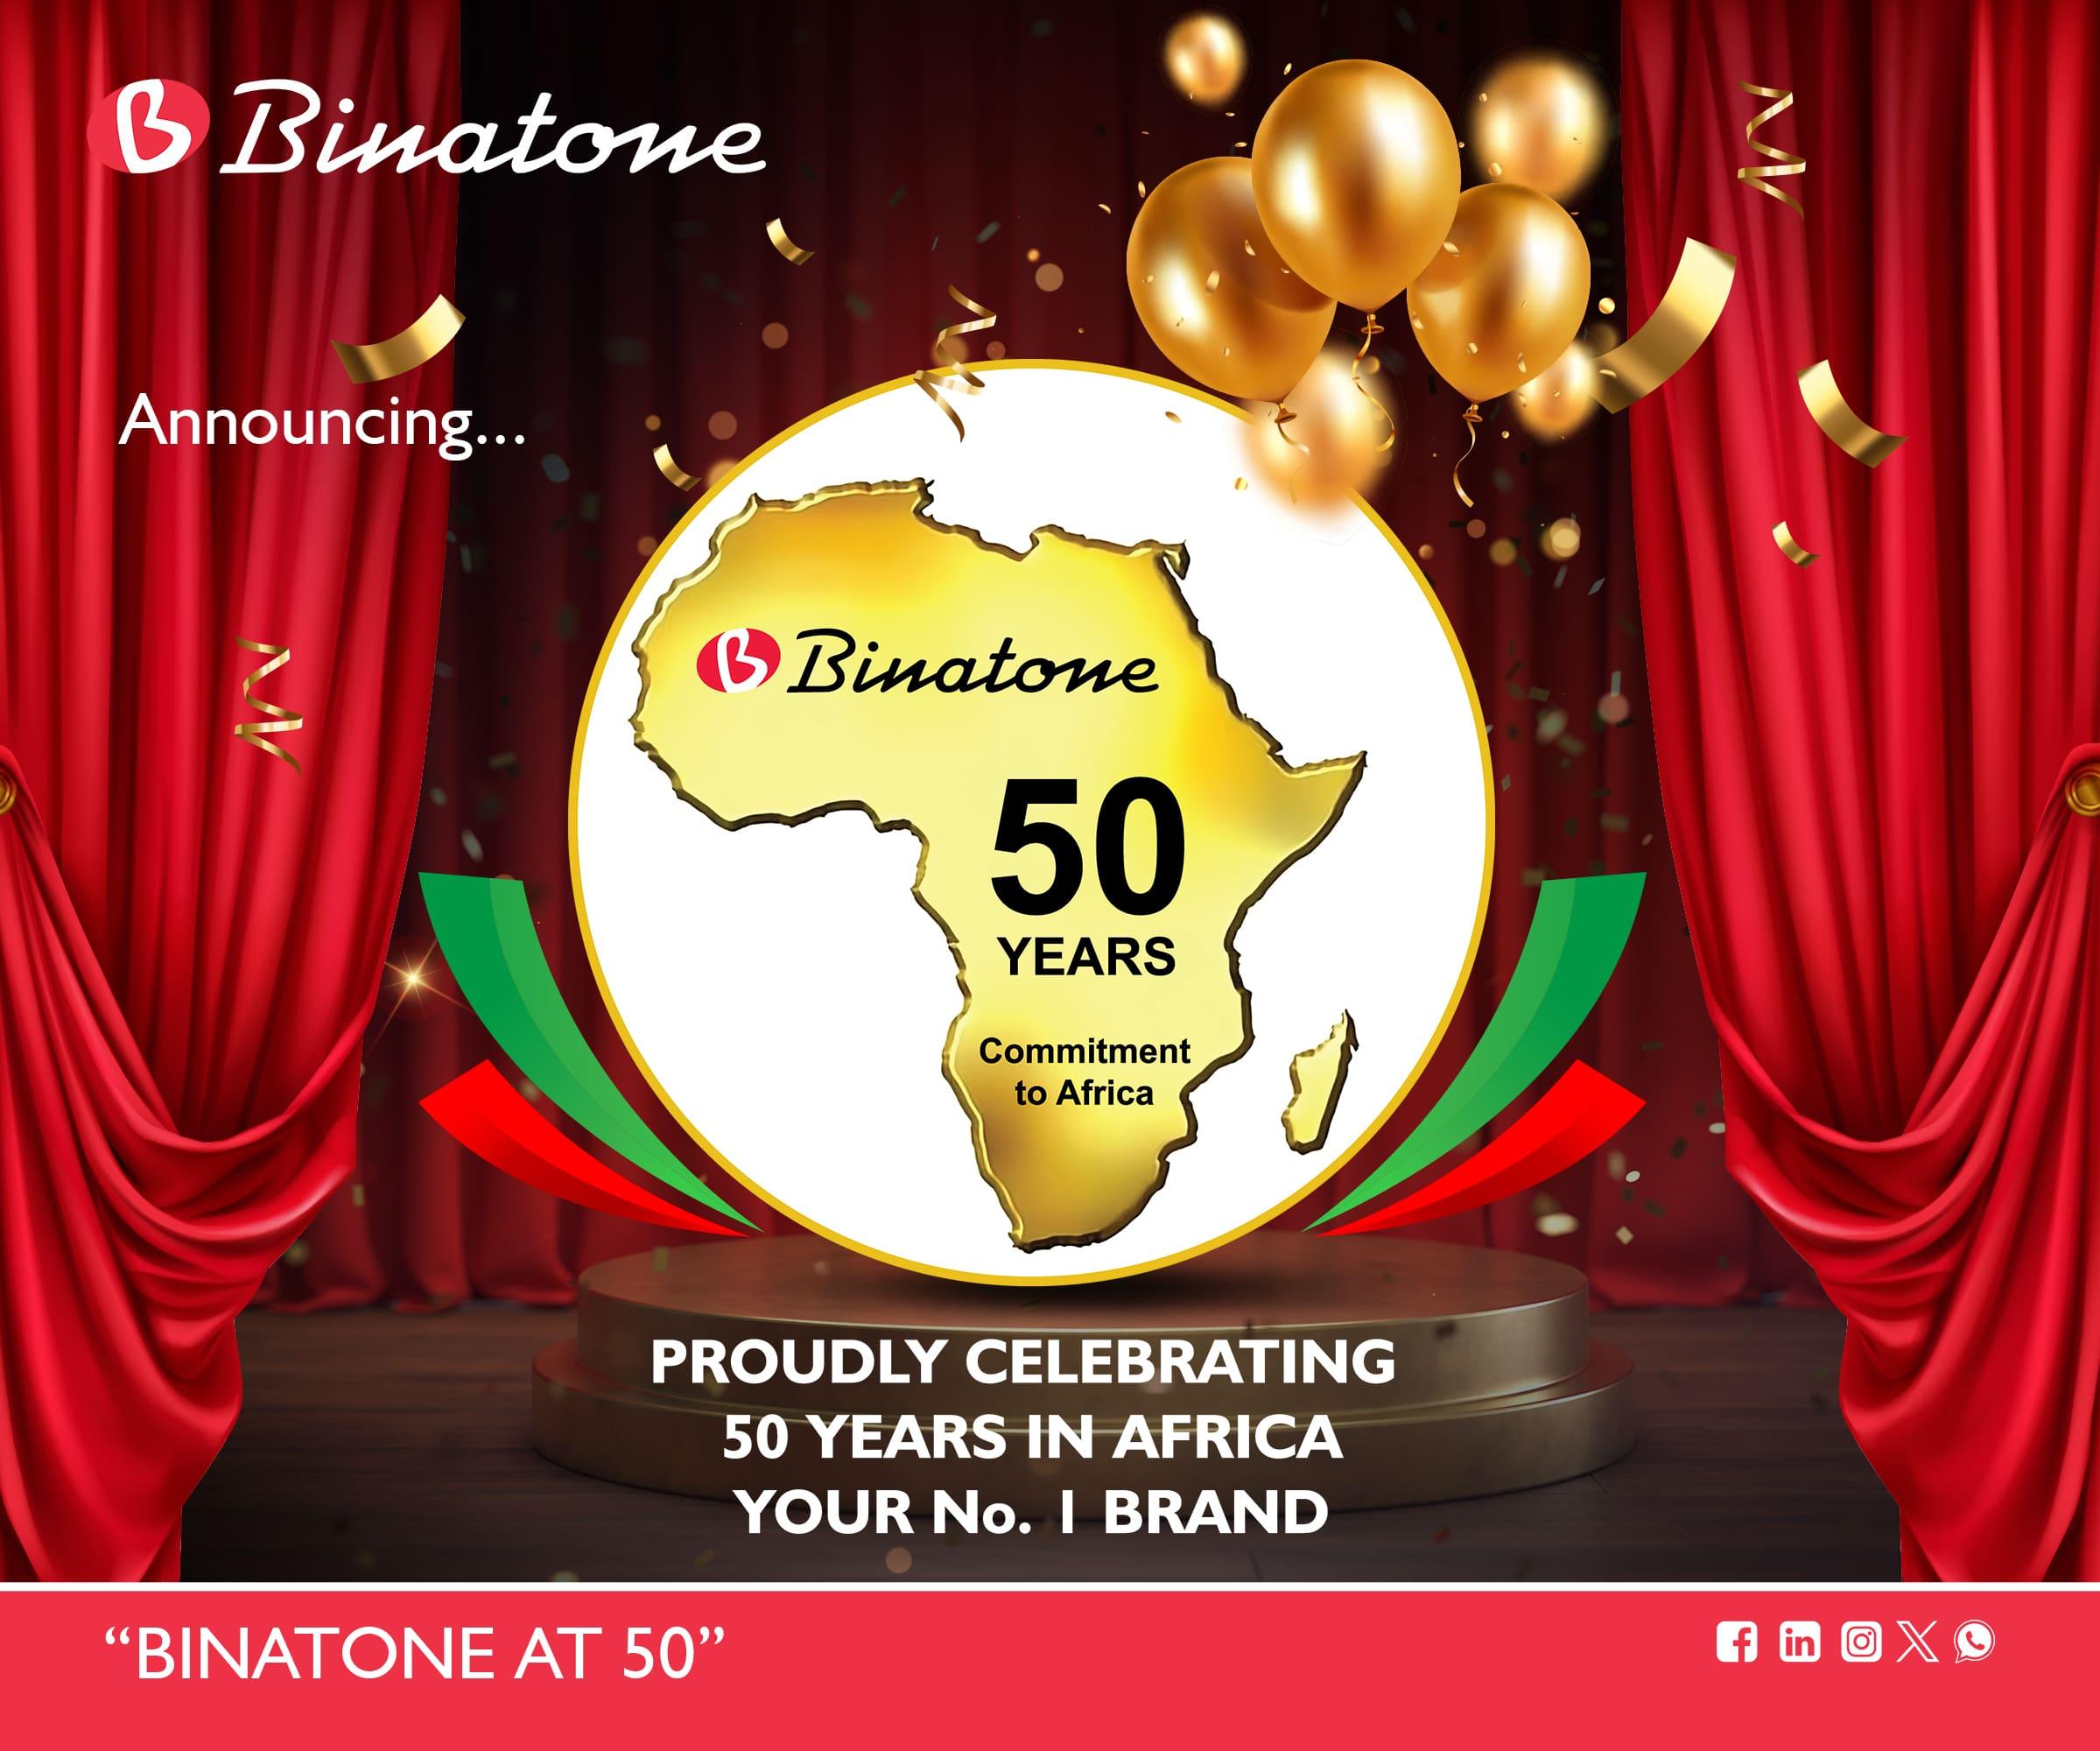 Binatone’s 50th Anniversary in Africa Logo Unveil: 50 Years Commitment to Africa